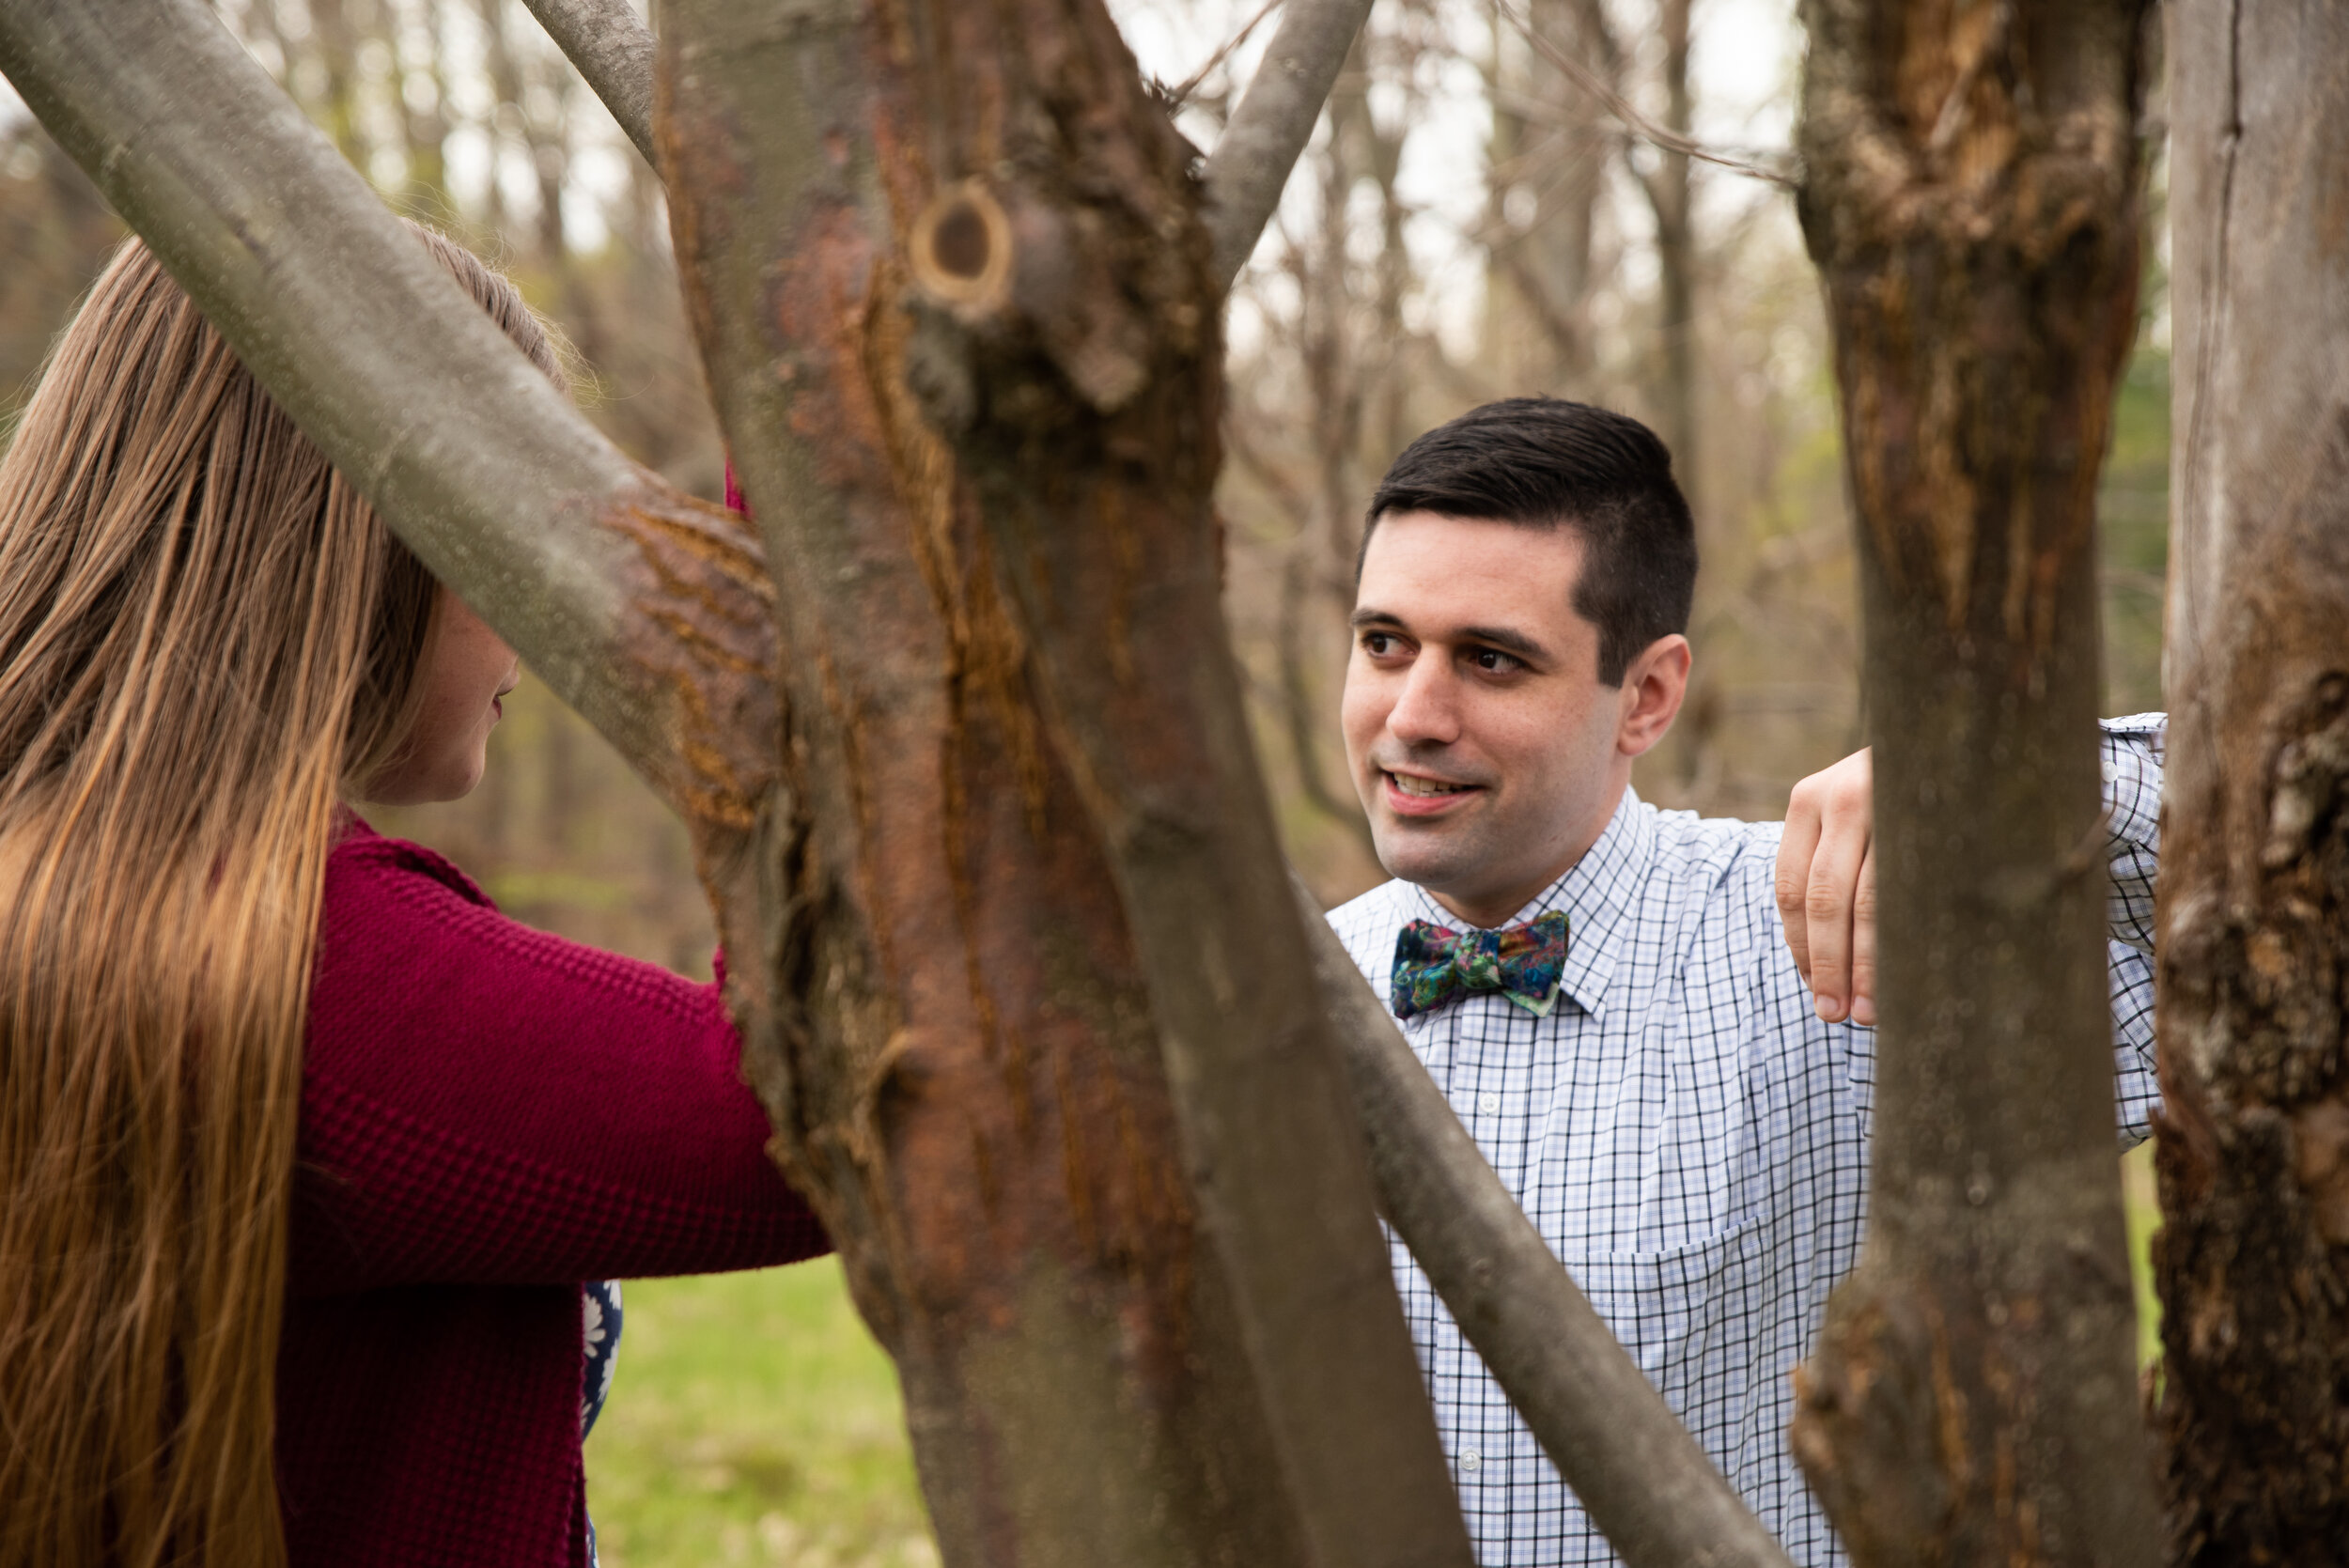 Liz and Josh's engagement photo shoot at Moore State Park in Paxton, MA photographed by Kara Emily Krantz Photography.